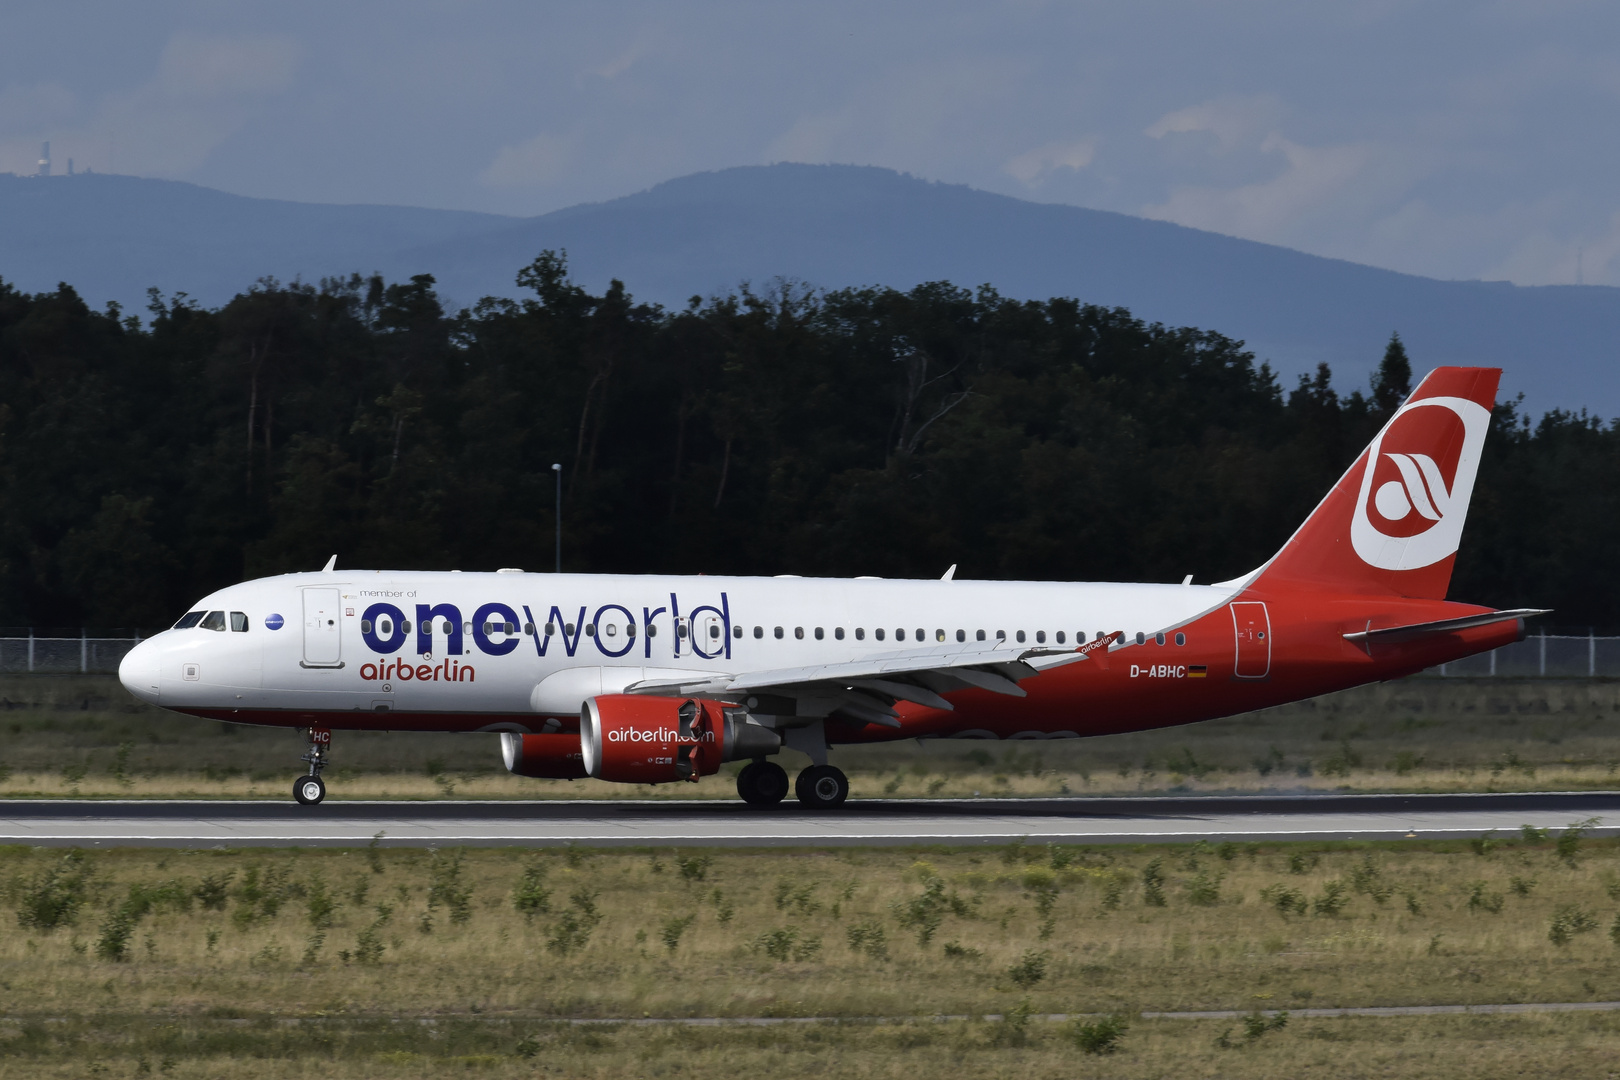 Air Berlin Member of One World  D-ABHC Airbus A320-200